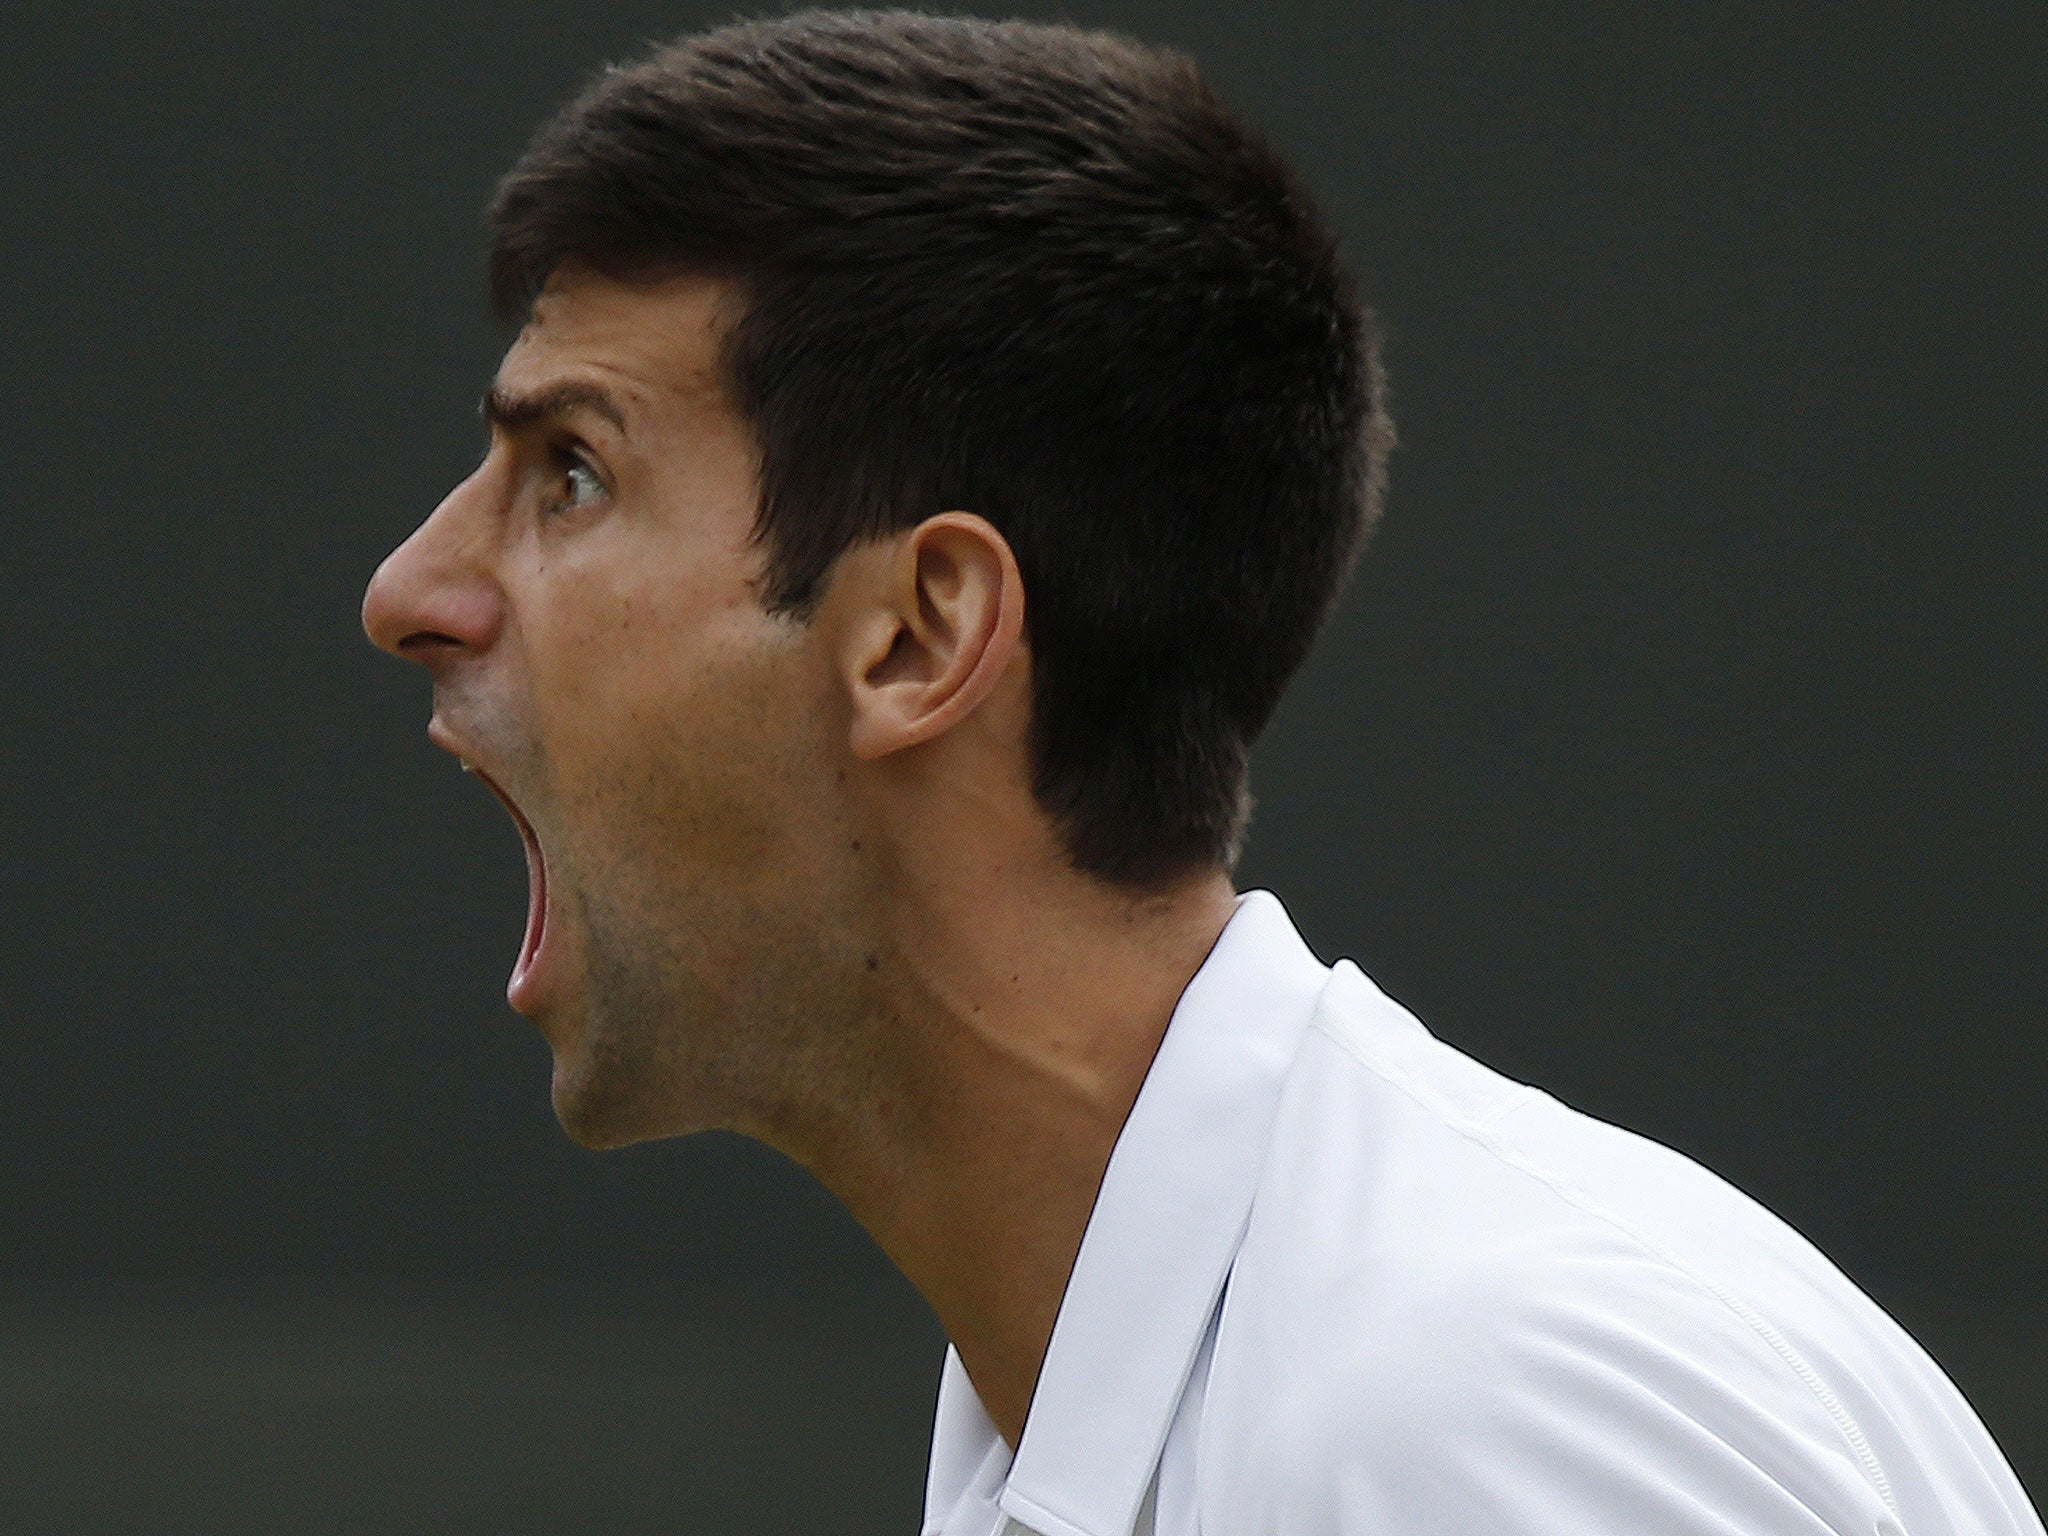 Djokovic during his match with Kevin Anderson